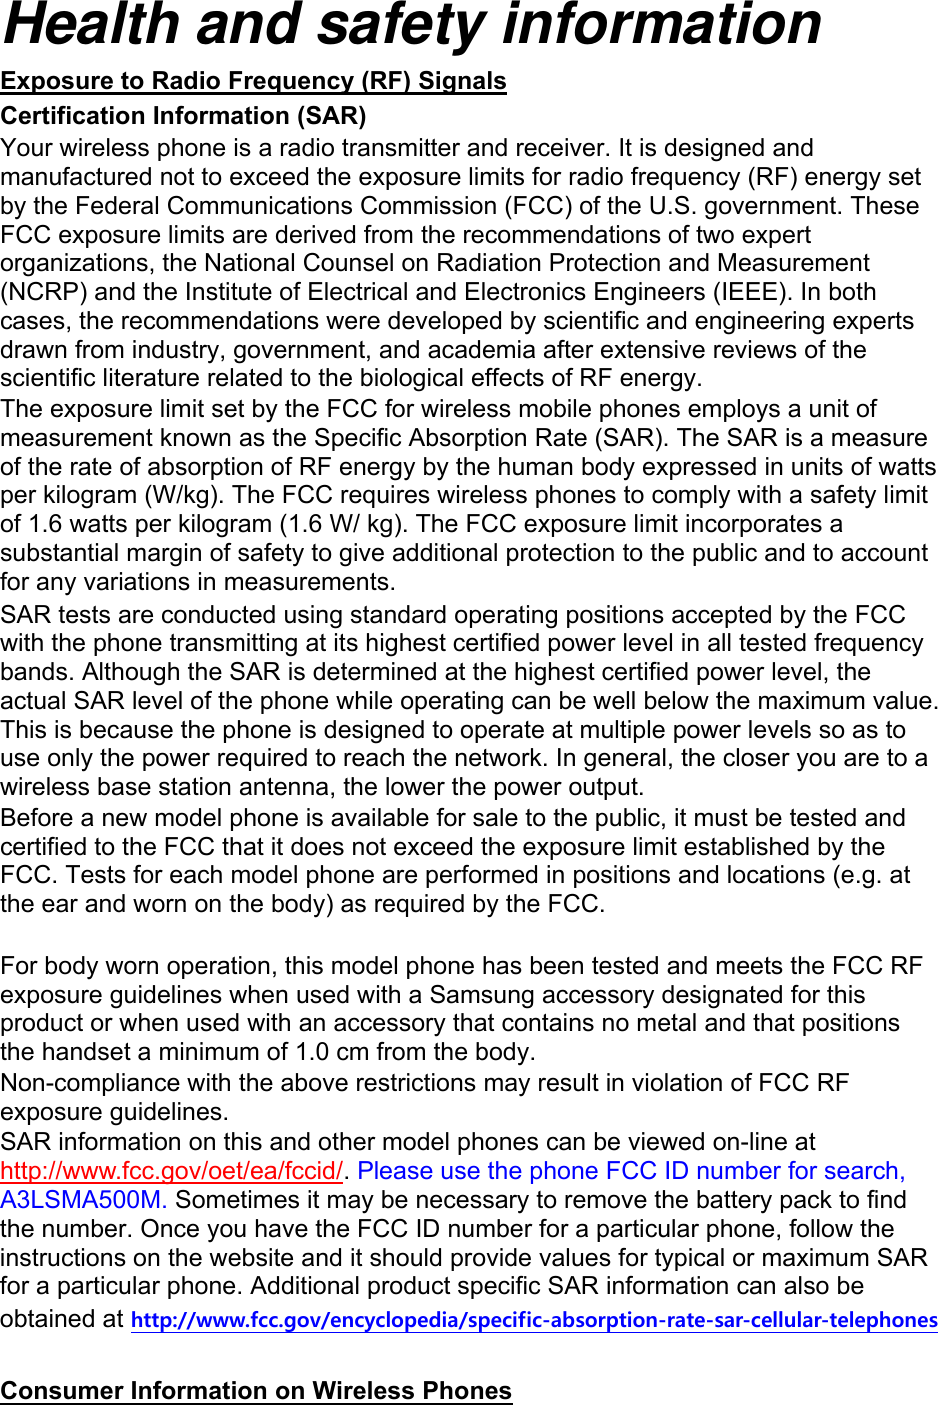 Health and safety information Exposure to Radio Frequency (RF) Signals Certification Information (SAR) Your wireless phone is a radio transmitter and receiver. It is designed and manufactured not to exceed the exposure limits for radio frequency (RF) energy set by the Federal Communications Commission (FCC) of the U.S. government. These FCC exposure limits are derived from the recommendations of two expert organizations, the National Counsel on Radiation Protection and Measurement (NCRP) and the Institute of Electrical and Electronics Engineers (IEEE). In both cases, the recommendations were developed by scientific and engineering experts drawn from industry, government, and academia after extensive reviews of the scientific literature related to the biological effects of RF energy. The exposure limit set by the FCC for wireless mobile phones employs a unit of measurement known as the Specific Absorption Rate (SAR). The SAR is a measure of the rate of absorption of RF energy by the human body expressed in units of watts per kilogram (W/kg). The FCC requires wireless phones to comply with a safety limit of 1.6 watts per kilogram (1.6 W/ kg). The FCC exposure limit incorporates a substantial margin of safety to give additional protection to the public and to account for any variations in measurements. SAR tests are conducted using standard operating positions accepted by the FCC with the phone transmitting at its highest certified power level in all tested frequency bands. Although the SAR is determined at the highest certified power level, the actual SAR level of the phone while operating can be well below the maximum value. This is because the phone is designed to operate at multiple power levels so as to use only the power required to reach the network. In general, the closer you are to a wireless base station antenna, the lower the power output. Before a new model phone is available for sale to the public, it must be tested and certified to the FCC that it does not exceed the exposure limit established by the FCC. Tests for each model phone are performed in positions and locations (e.g. at the ear and worn on the body) as required by the FCC.      For body worn operation, this model phone has been tested and meets the FCC RF exposure guidelines when used with a Samsung accessory designated for this product or when used with an accessory that contains no metal and that positions the handset a minimum of 1.0 cm from the body.   Non-compliance with the above restrictions may result in violation of FCC RF exposure guidelines. SAR information on this and other model phones can be viewed on-line at http://www.fcc.gov/oet/ea/fccid/. Please use the phone FCC ID number for search, A3LSMA500M. Sometimes it may be necessary to remove the battery pack to find the number. Once you have the FCC ID number for a particular phone, follow the instructions on the website and it should provide values for typical or maximum SAR for a particular phone. Additional product specific SAR information can also be obtained at http://www.fcc.gov/encyclopedia/specific-absorption-rate-sar-cellular-telephones  Consumer Information on Wireless Phones 